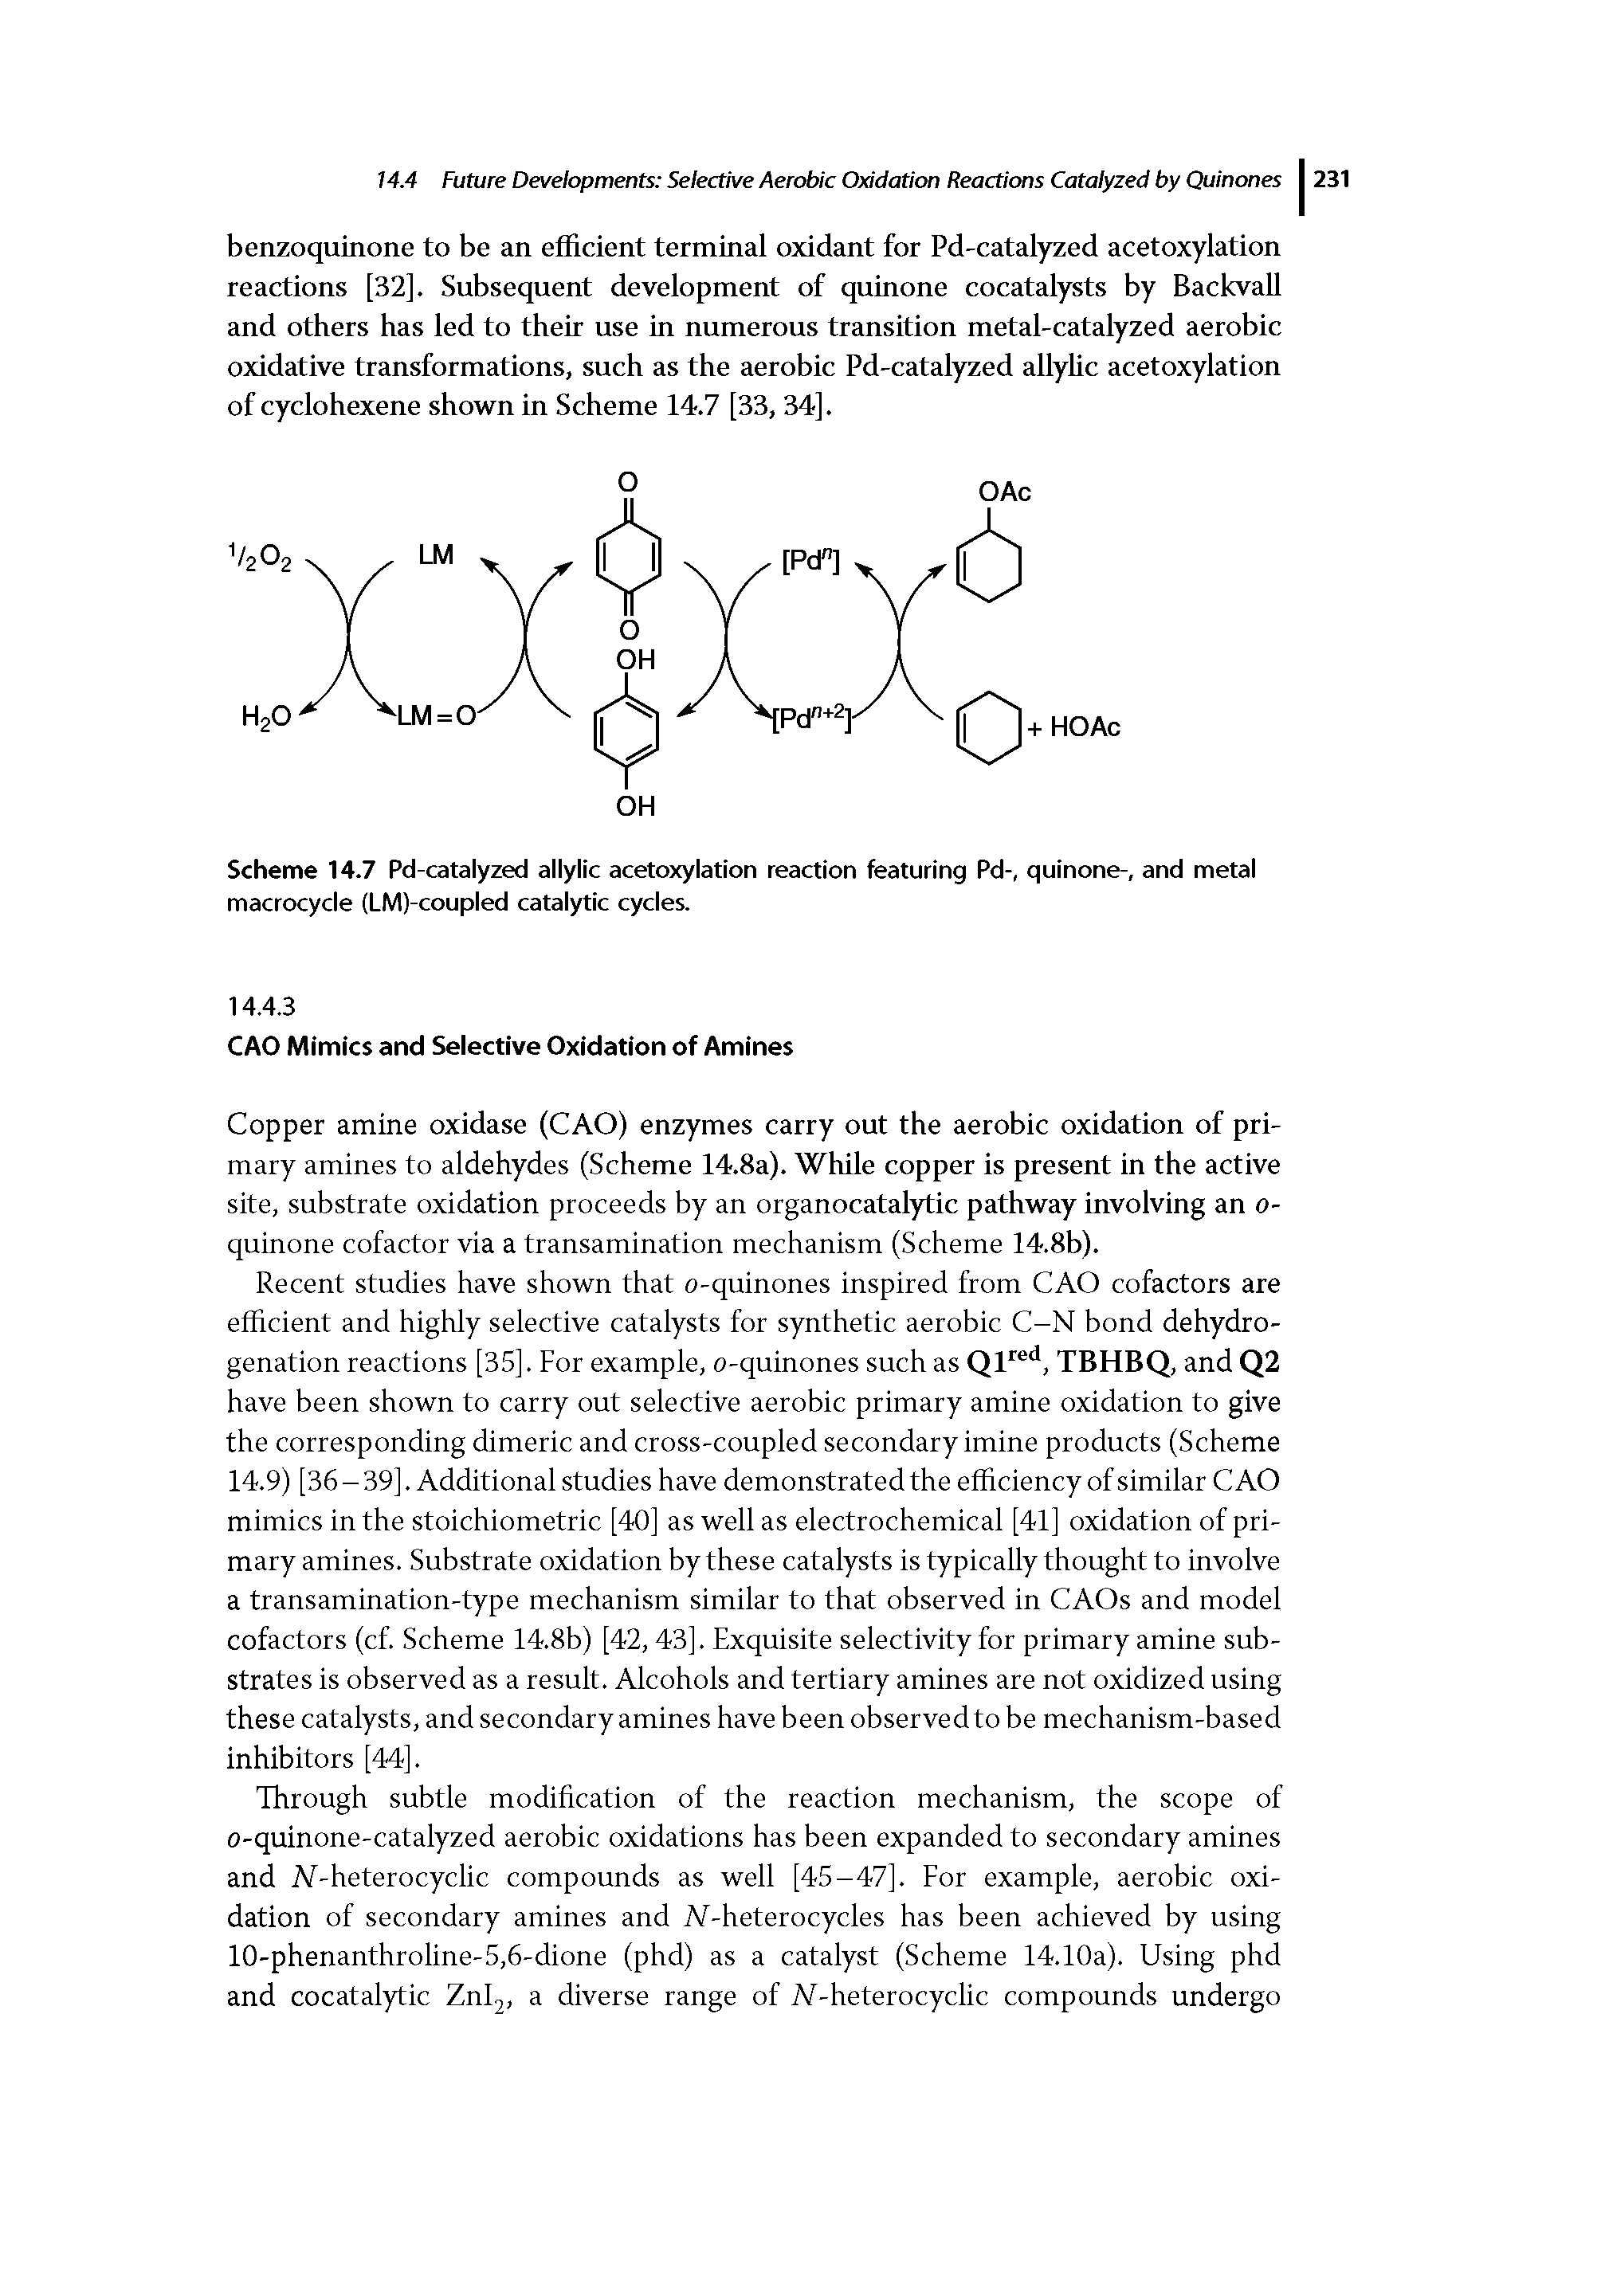 Scheme 14.7 Pd-catalyzed allylic acetoxylation reaction featuring Pd-, quinone-, and metal macrocycle (LM)-coupled catalytic cycles.